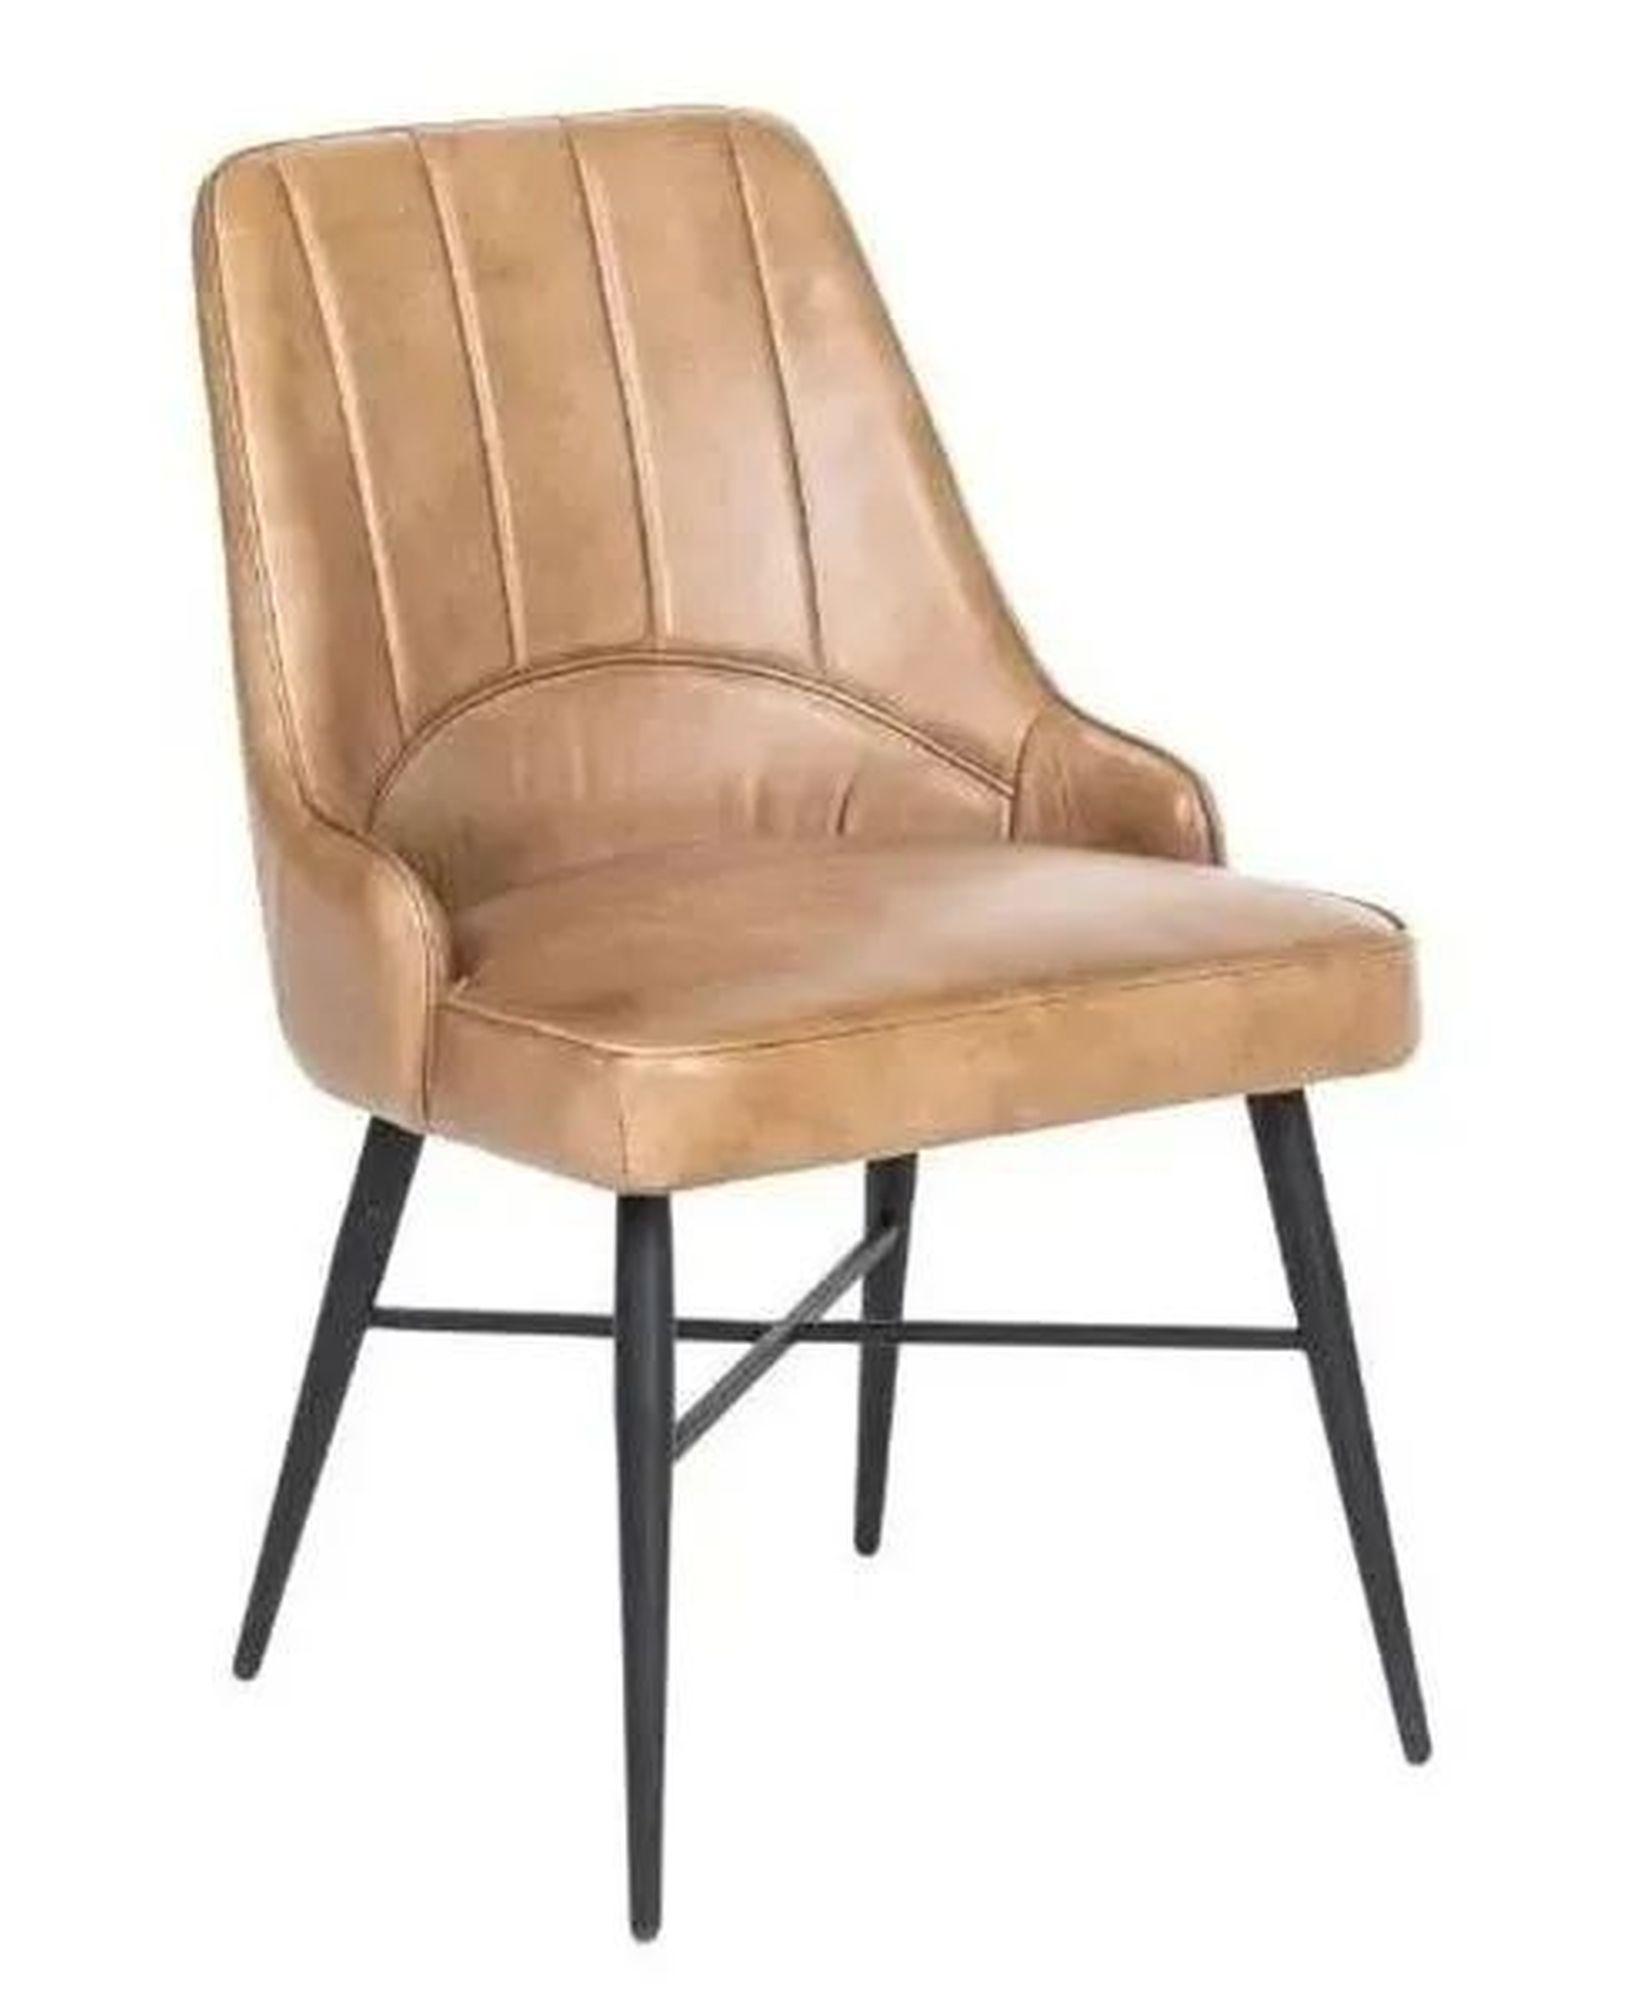 Toronto Stone Brown Dining Chair, Genuine Real Buffalo Leather